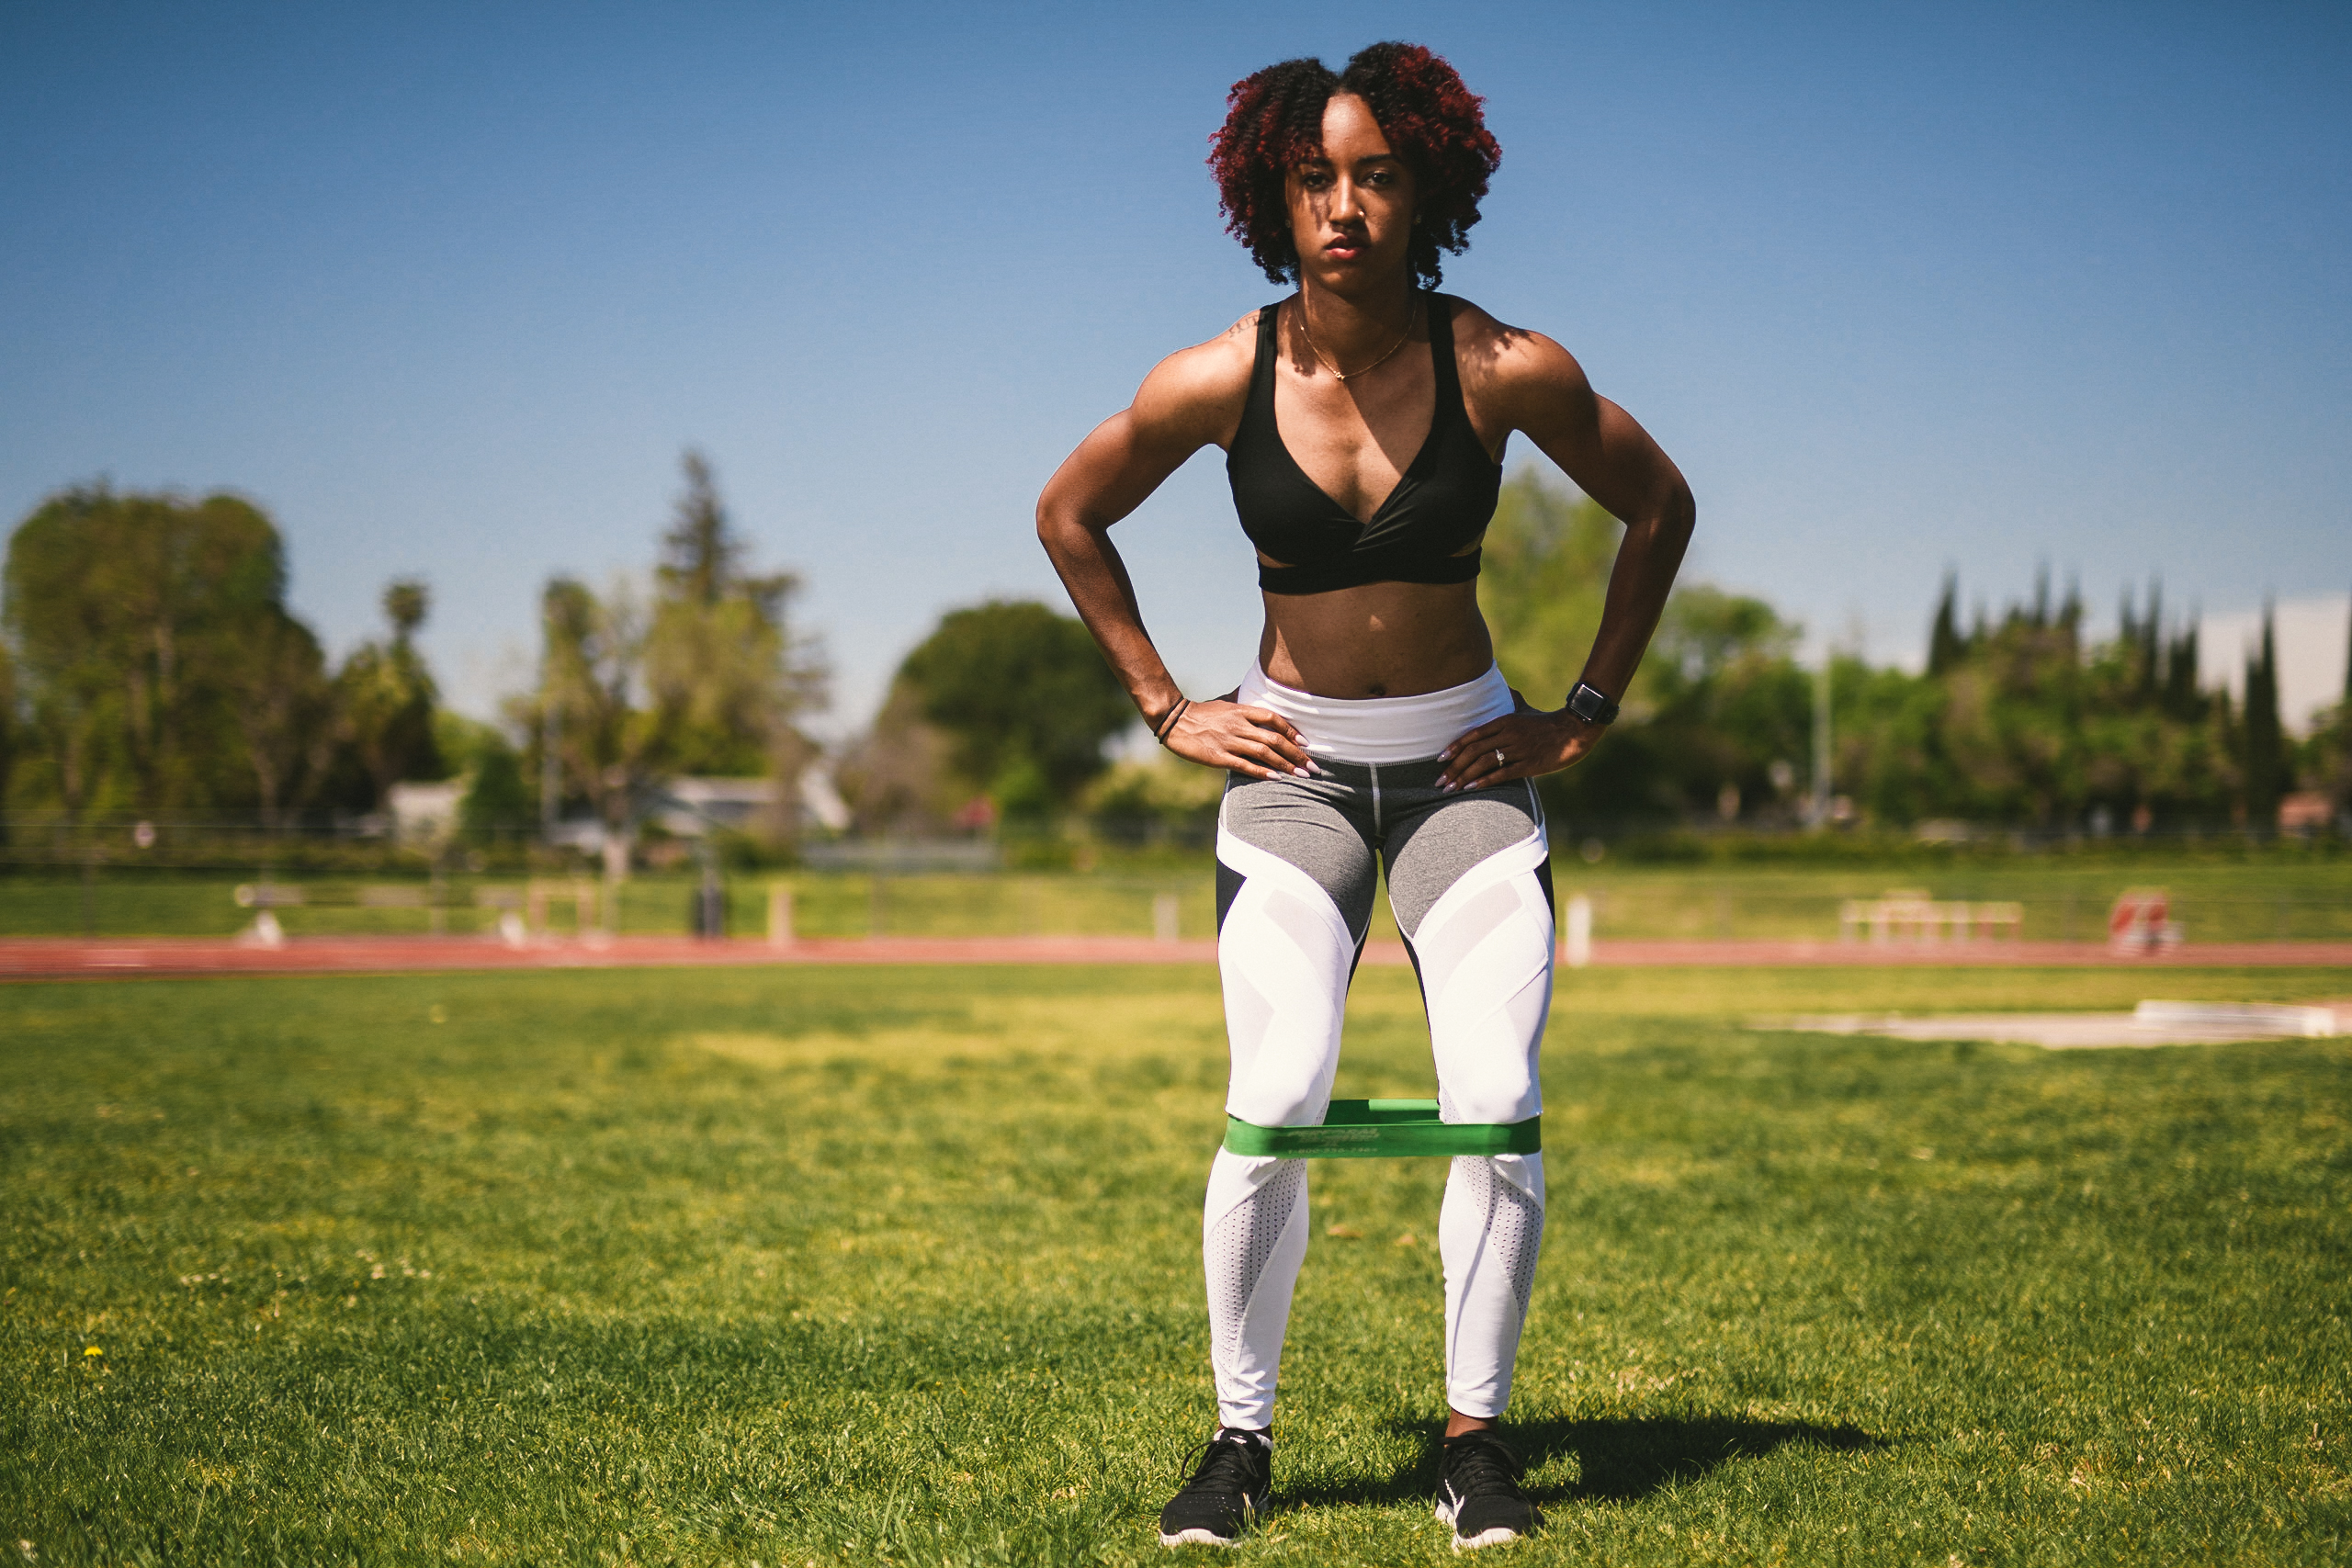 Professional Photography Services to elevate your brand C&I Studios Creative Marketing Kinetix 365 Woman posing for camera on a track field in track outfit using rubber band for stretching